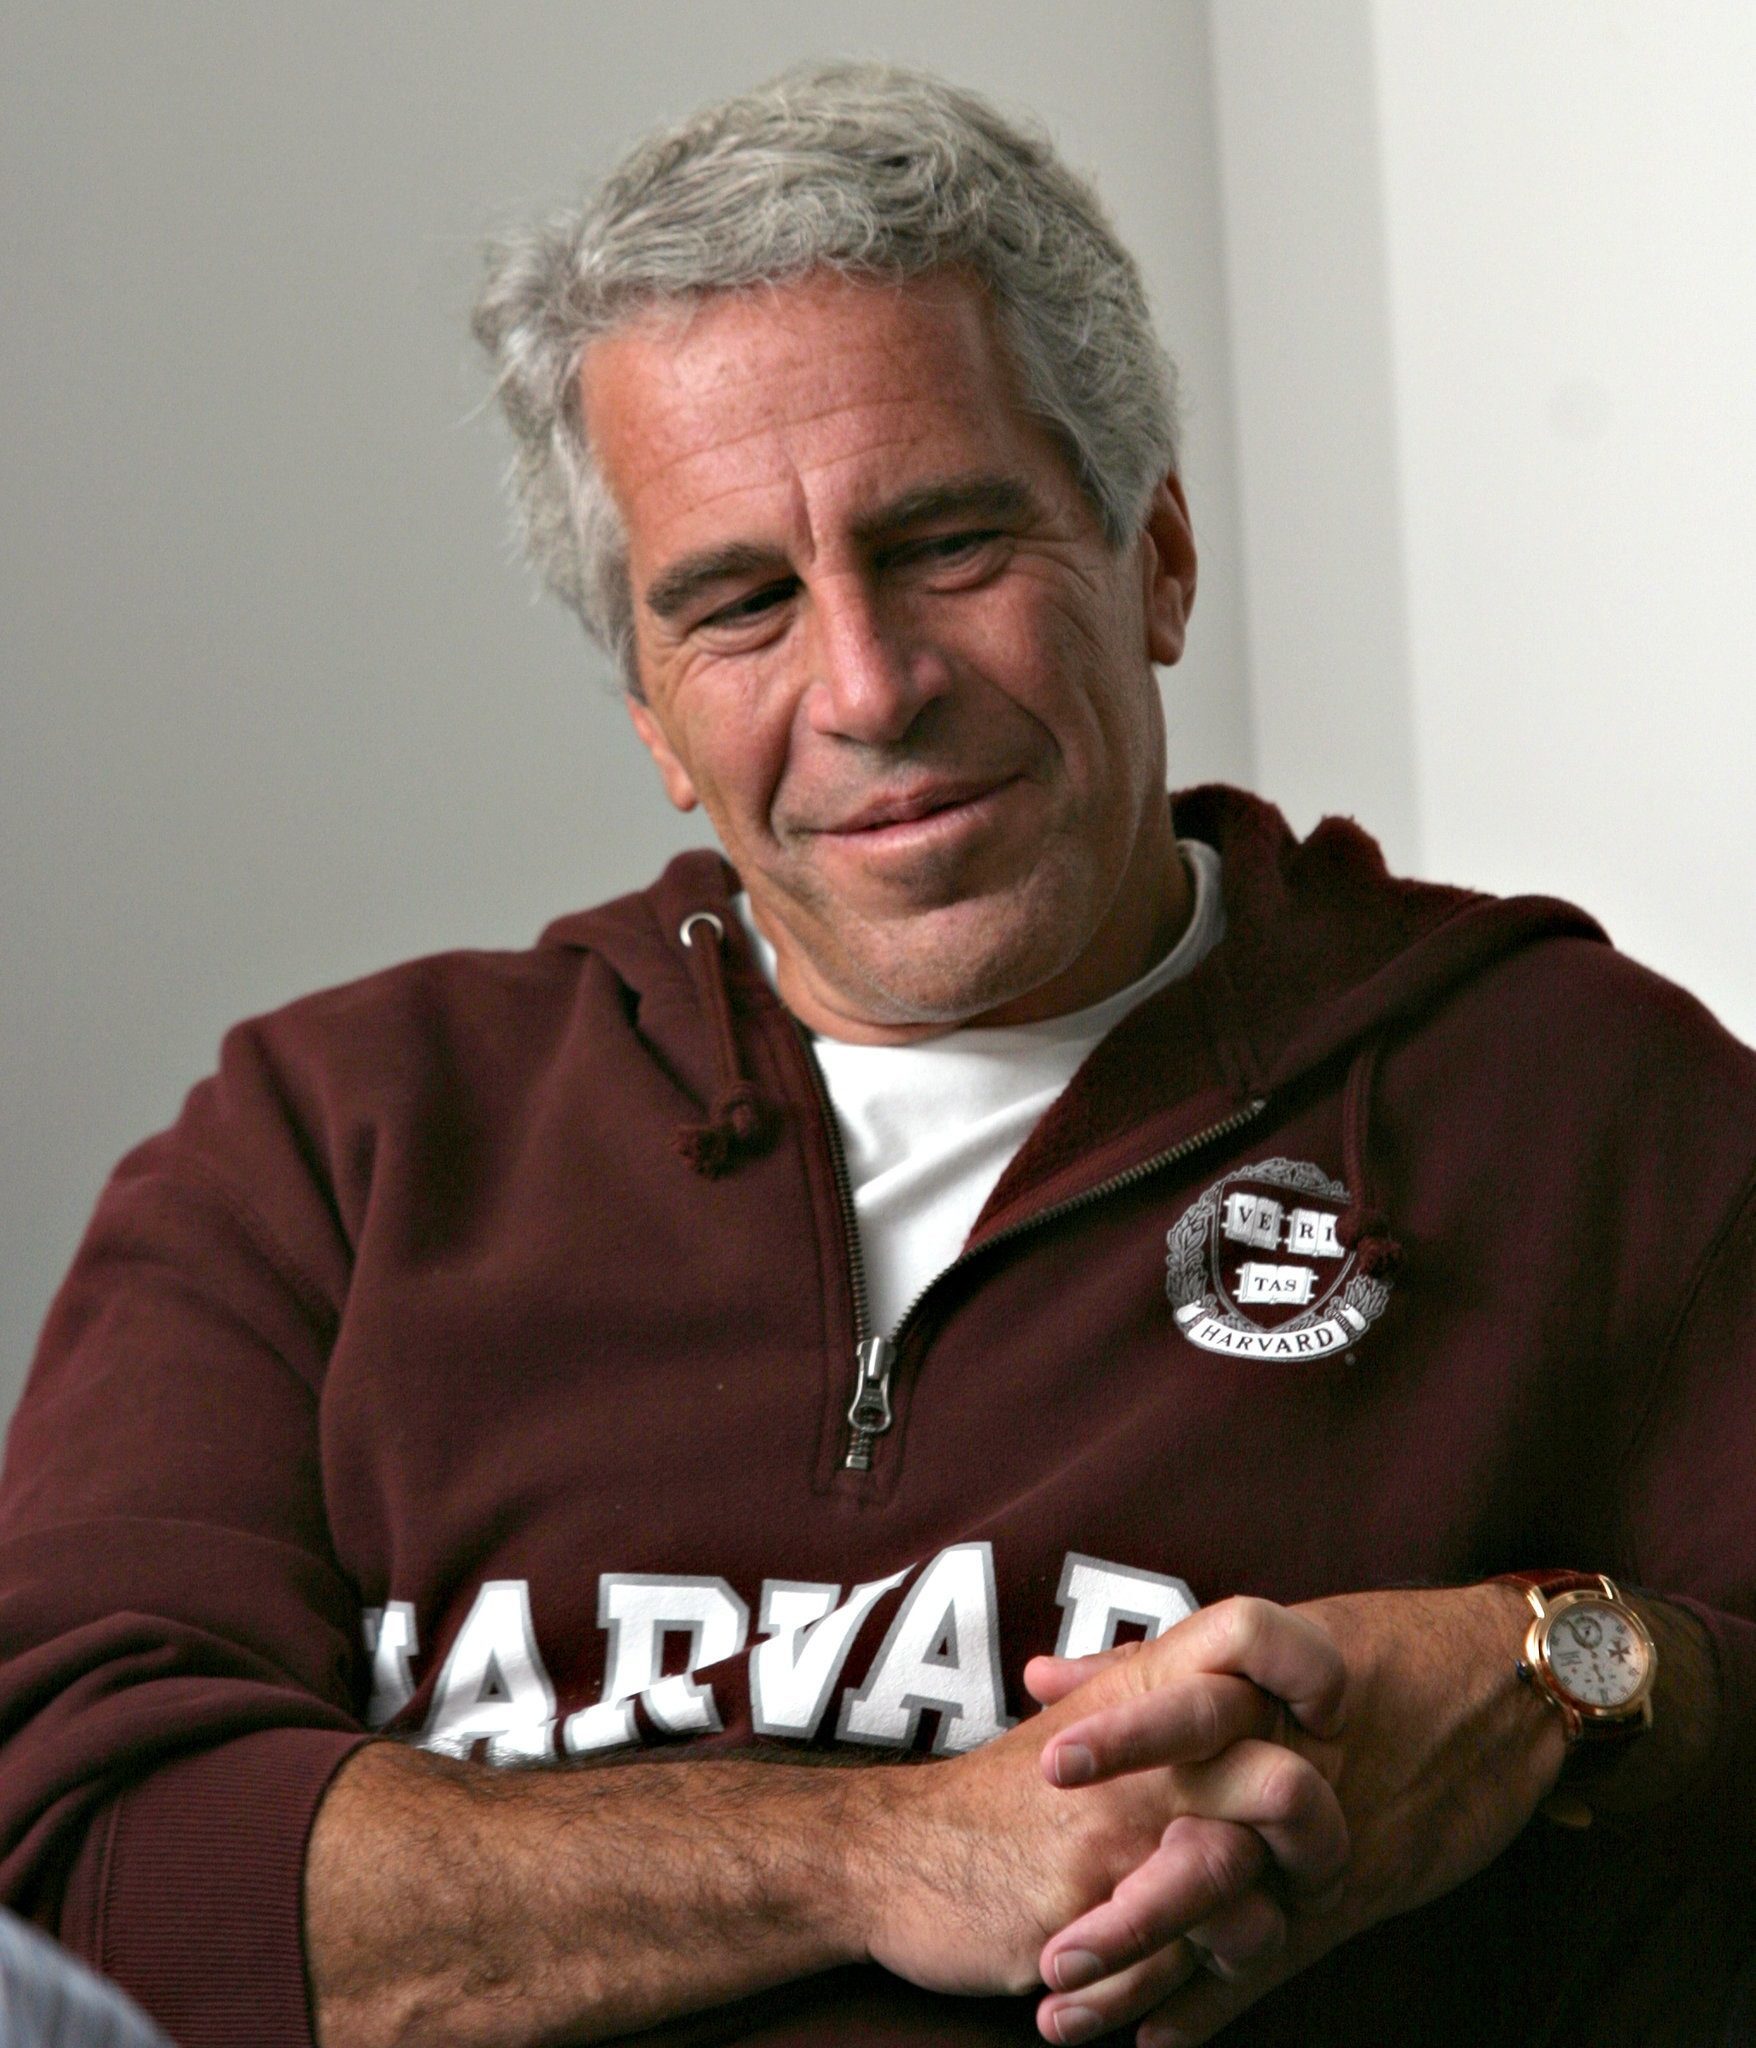 Jeffrey Epstein pitched a new narrative. These sites published it